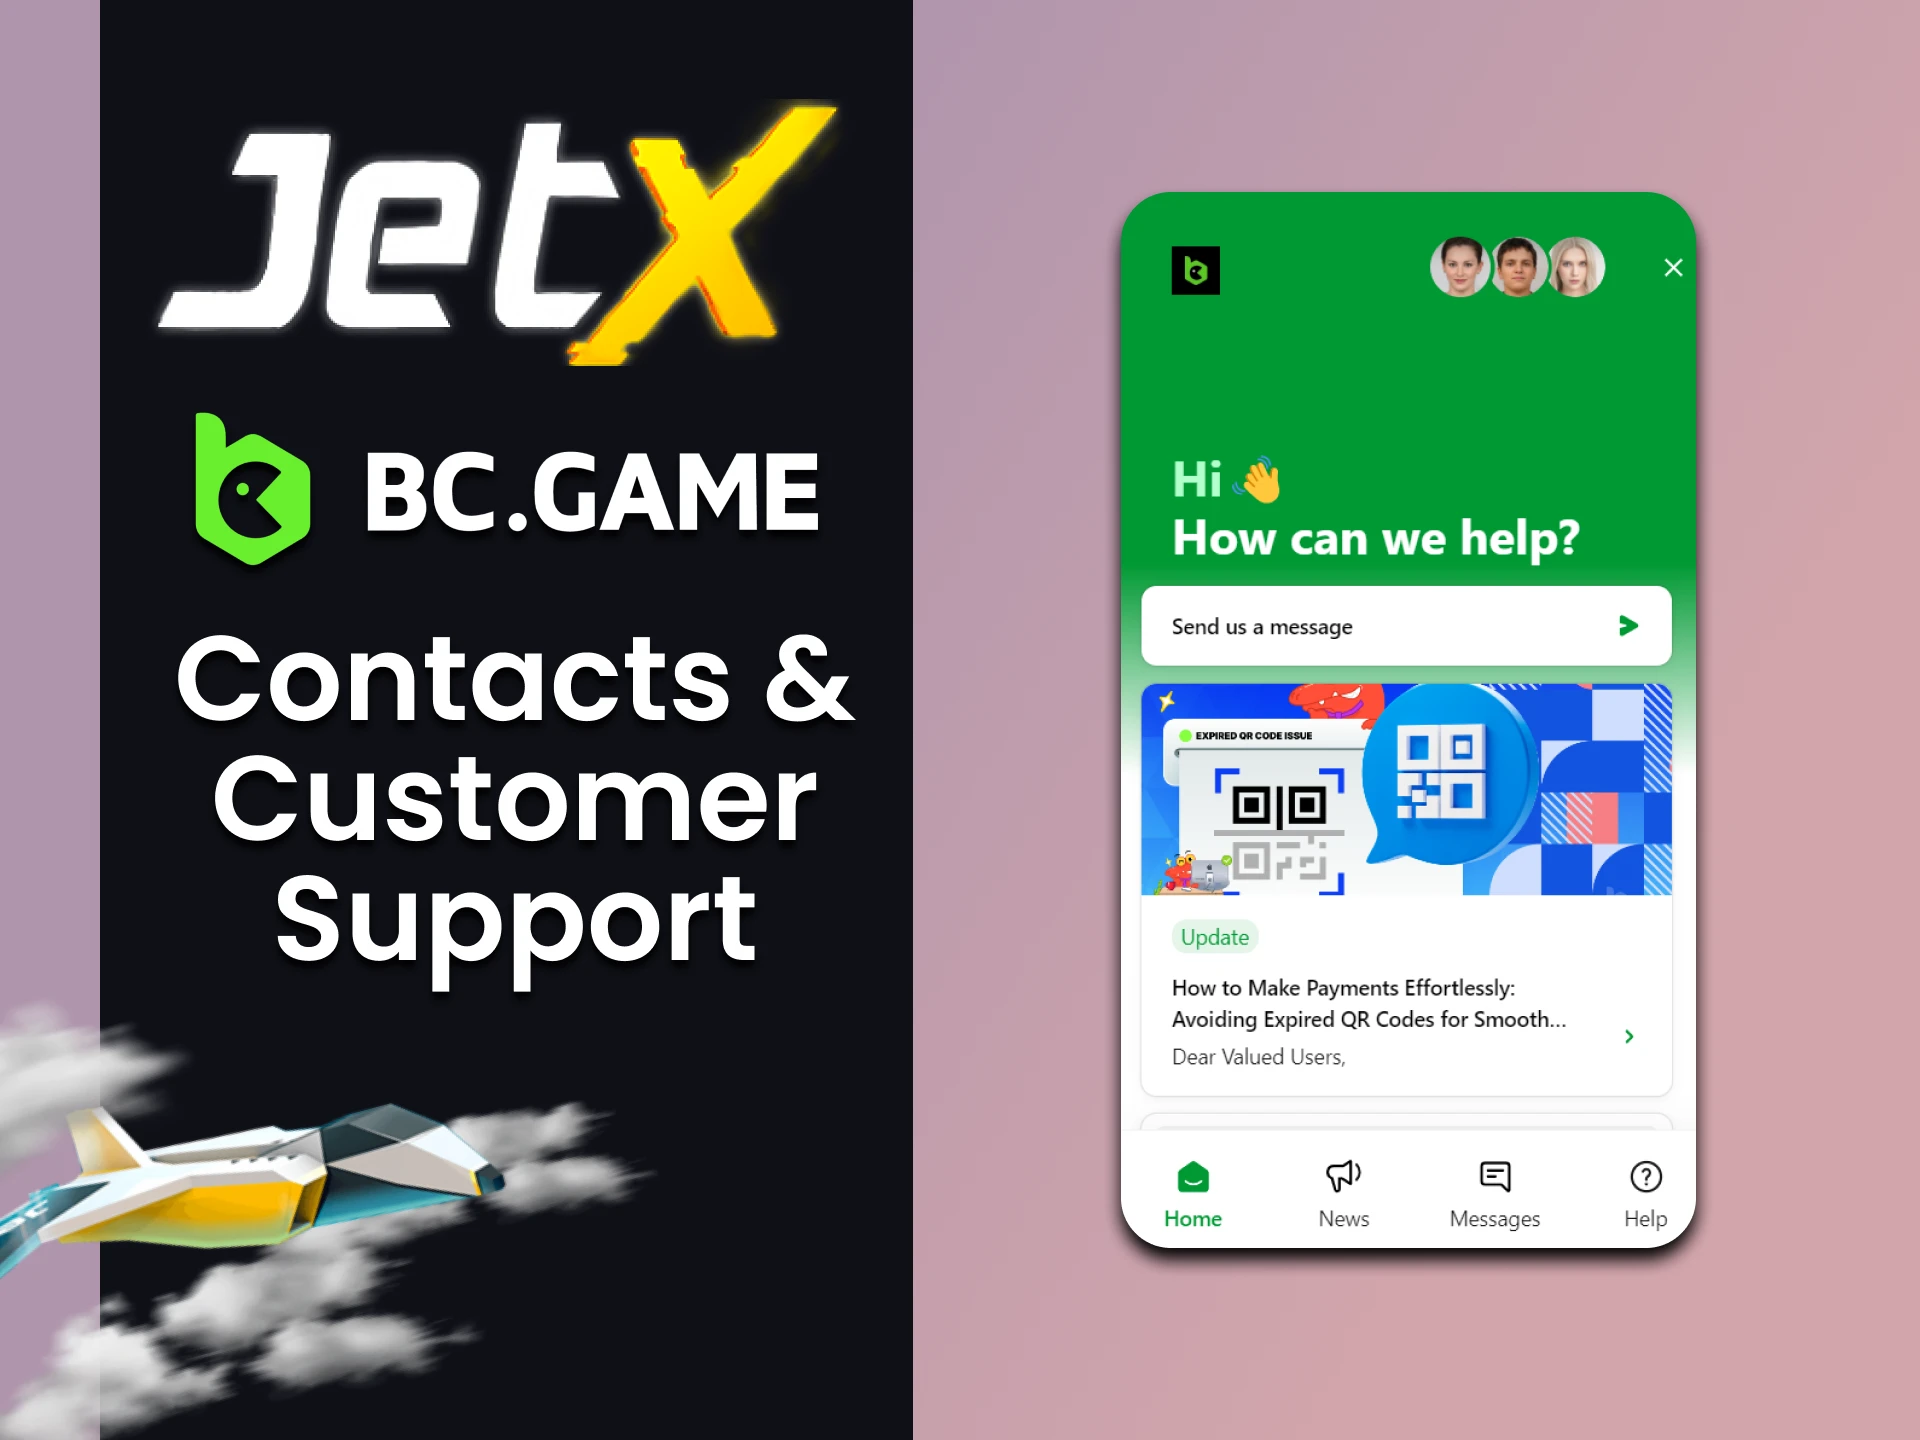 You can always contact the BC Game support team for the JetX game.